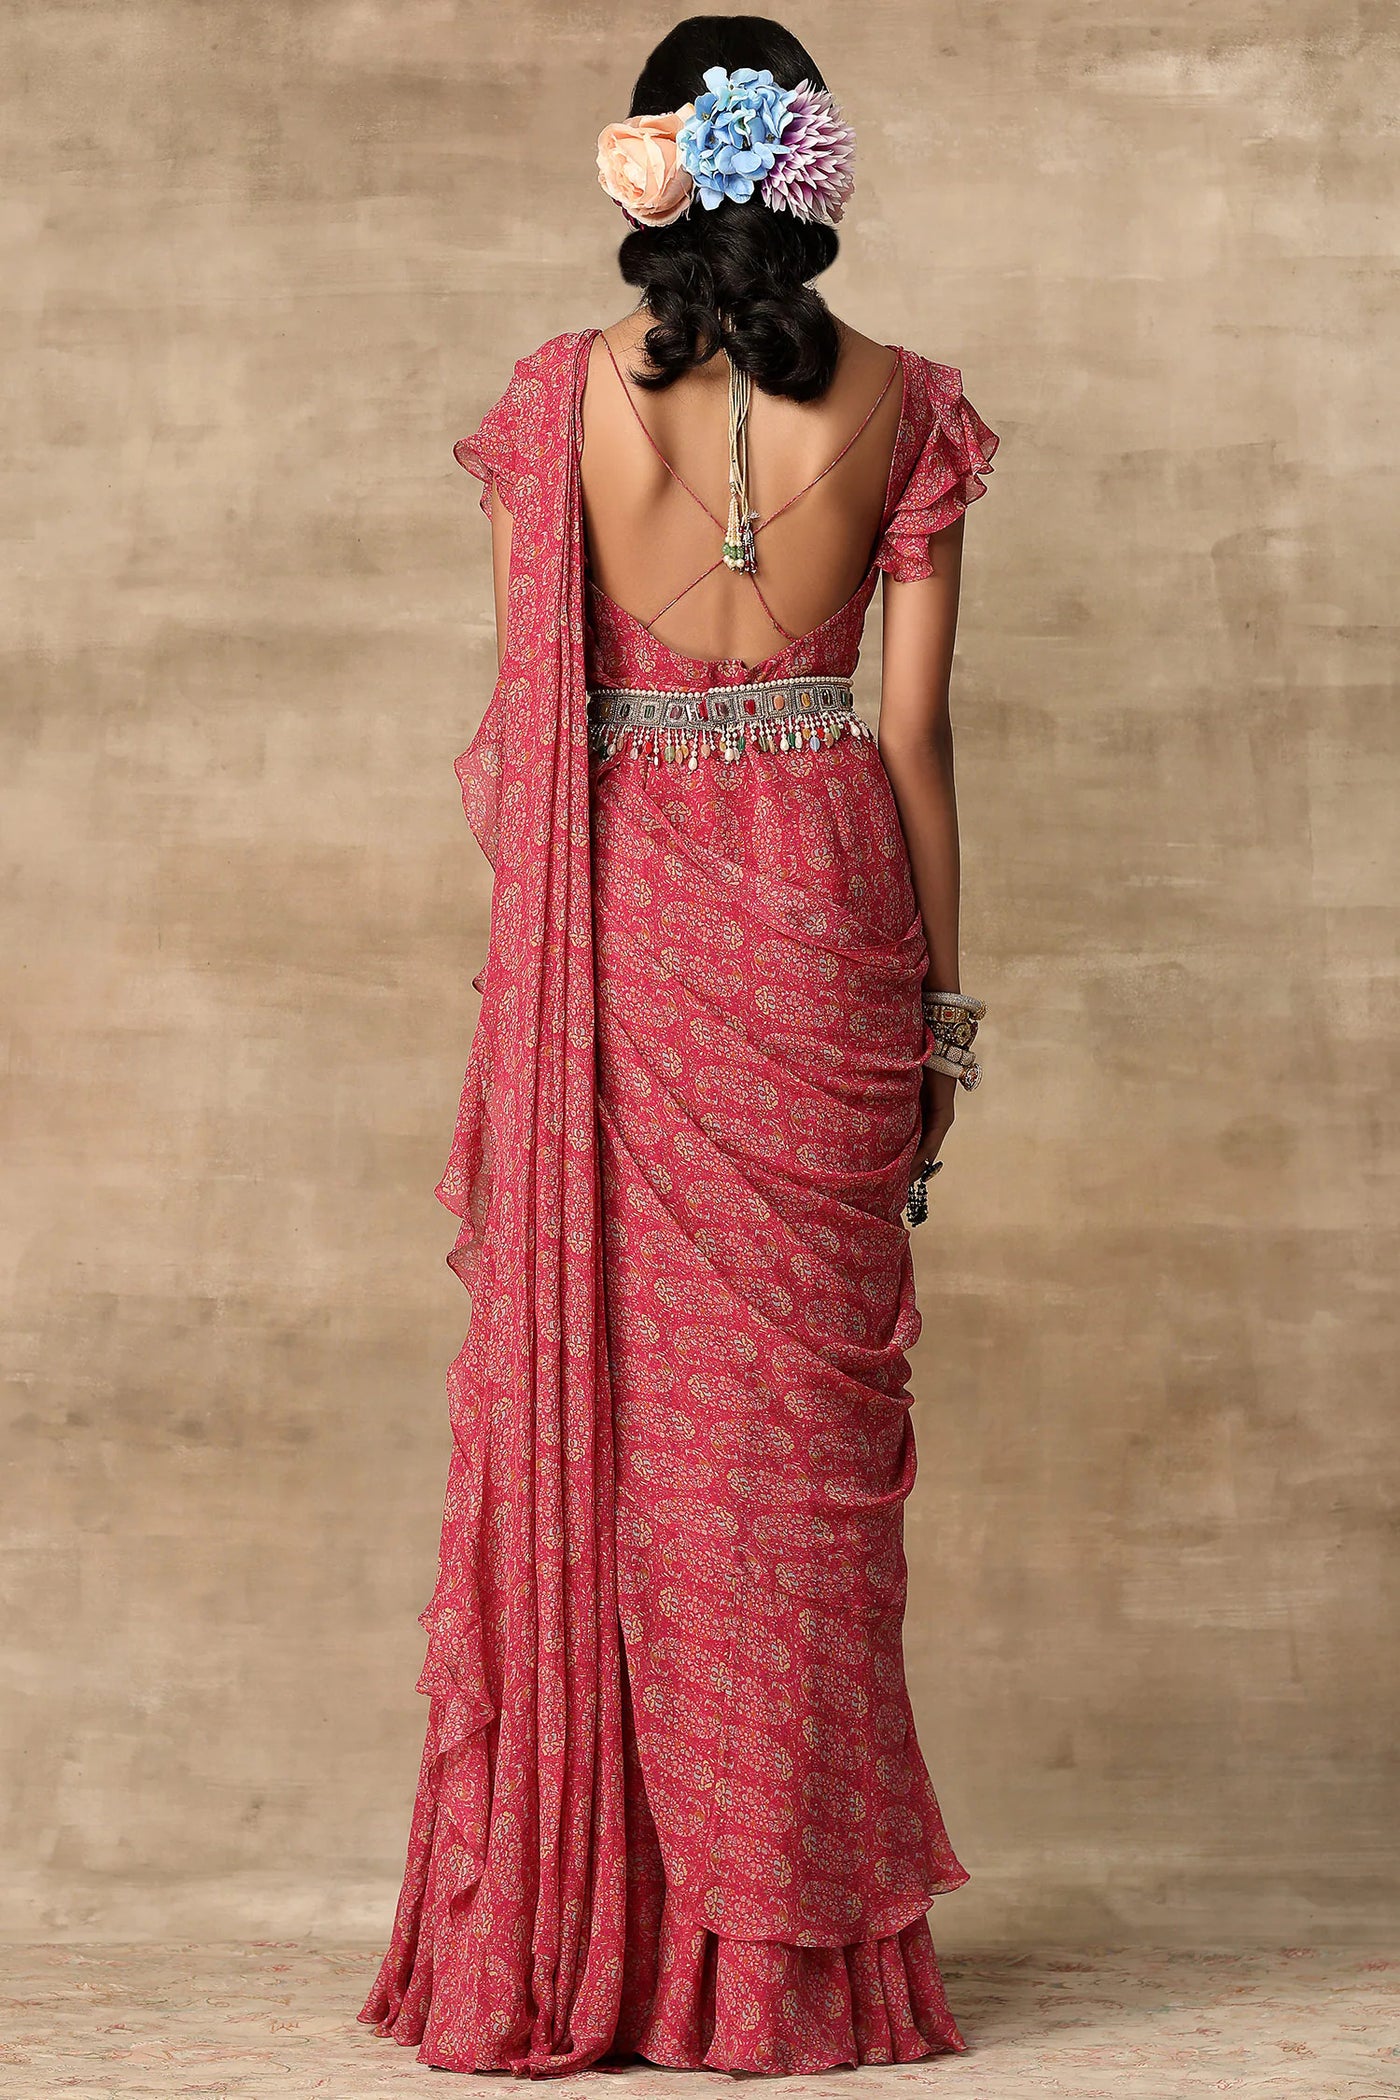 Buy Ready to Wear Sarees Online in India at G3Fashion